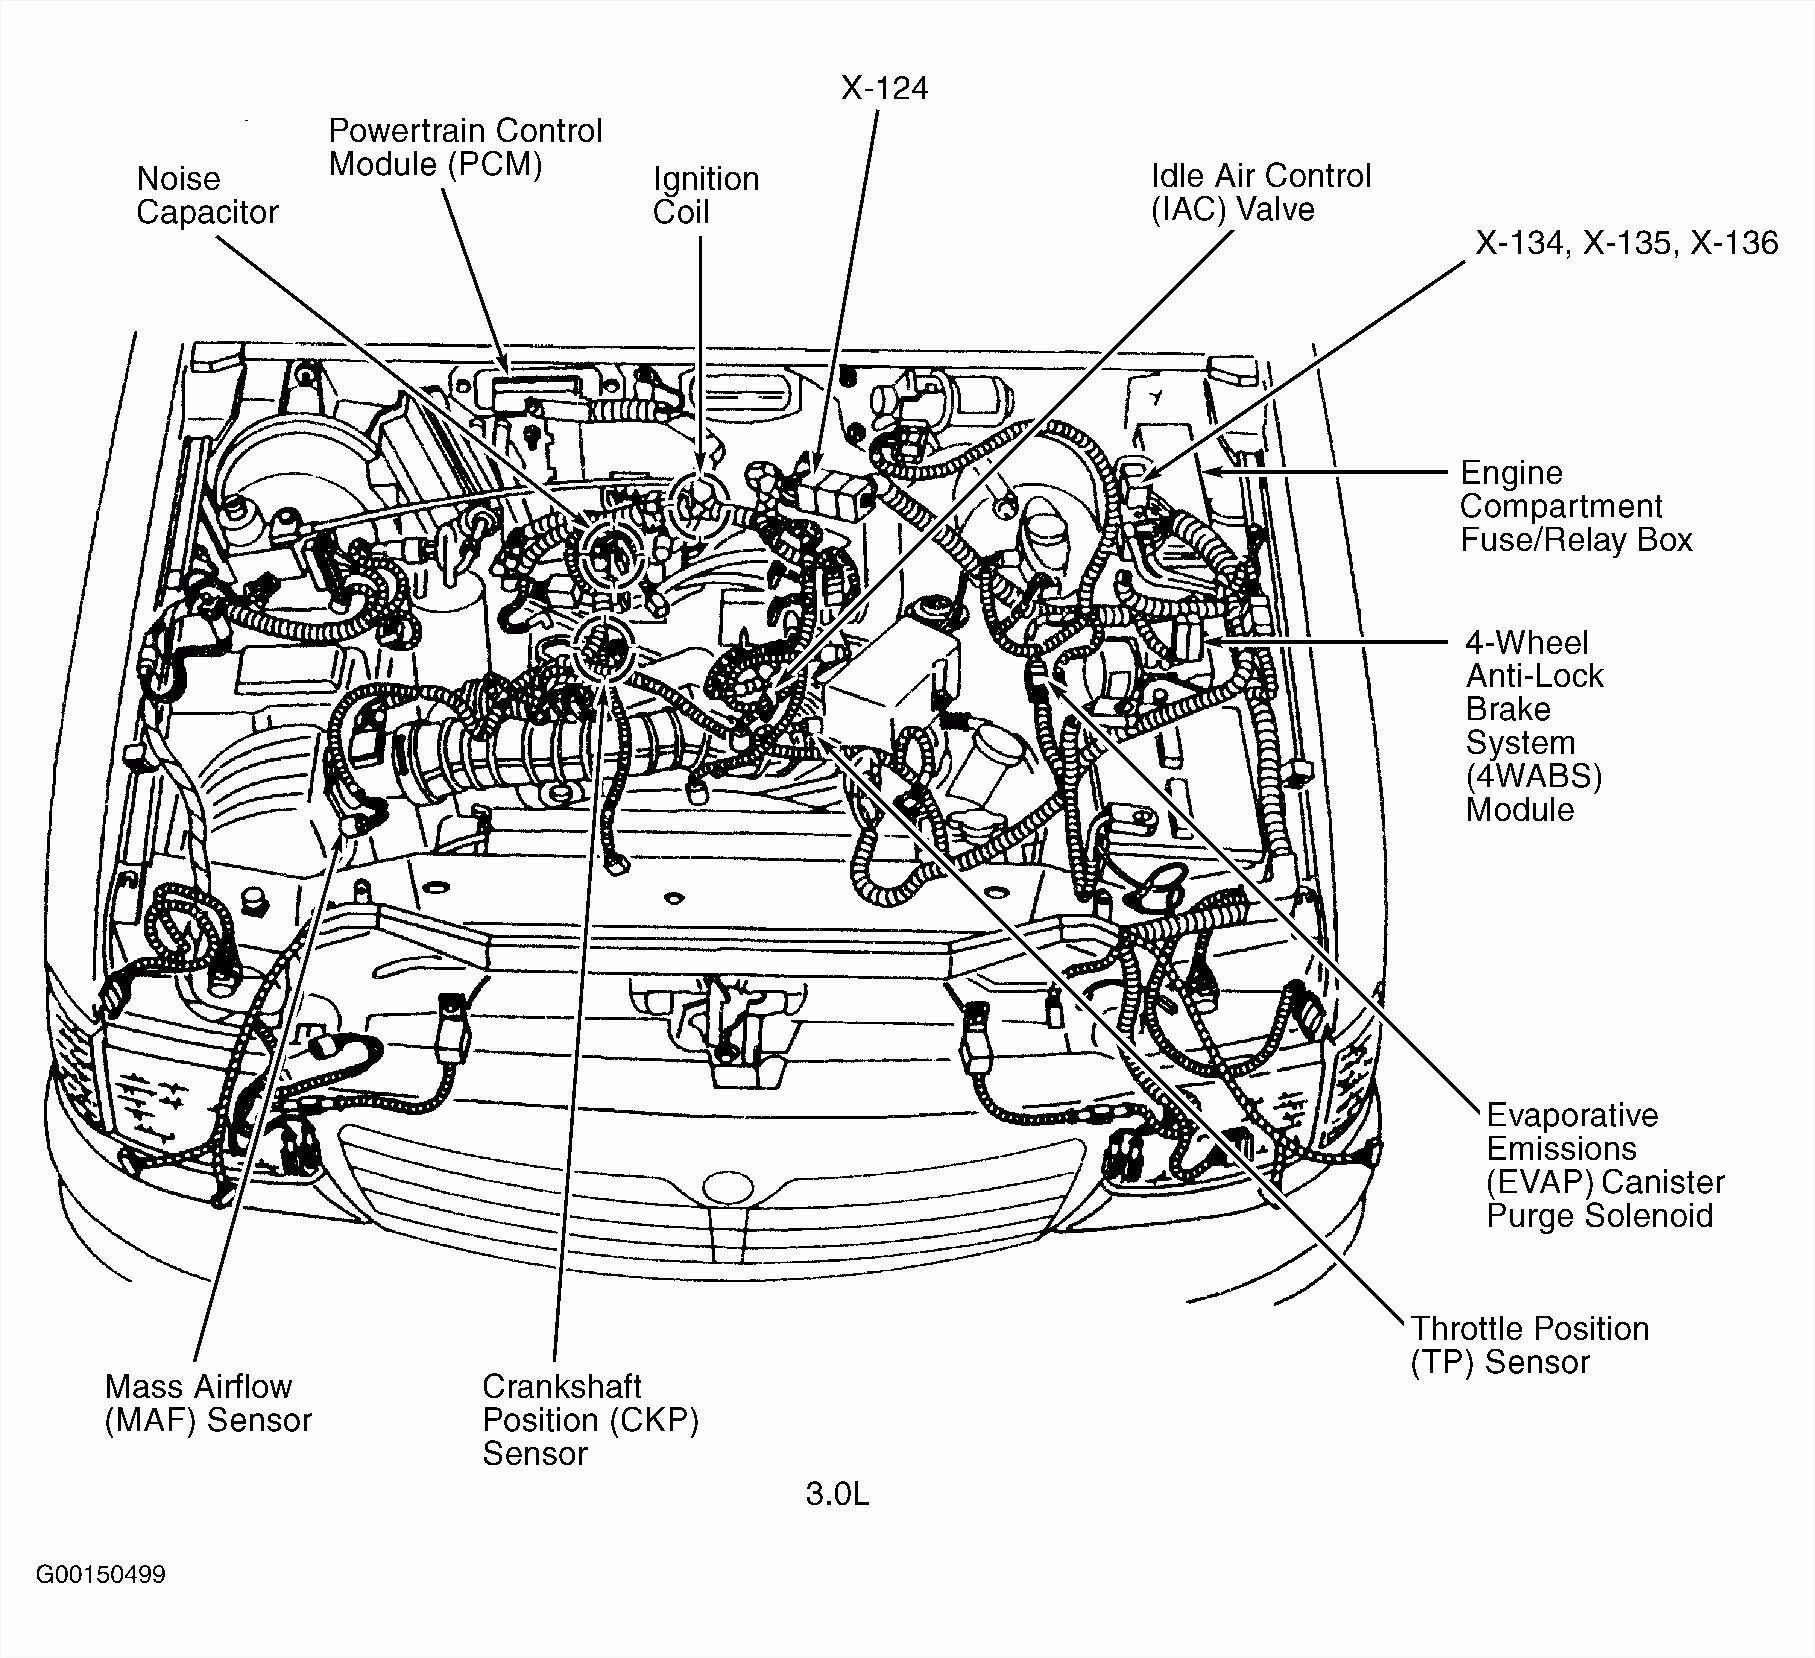 2000 Vw Beetle Engine Diagram Furthermore 2000 Vw Beetle Cooling System Diagram Also 2000 Vw Jetta Of 2000 Vw Beetle Engine Diagram